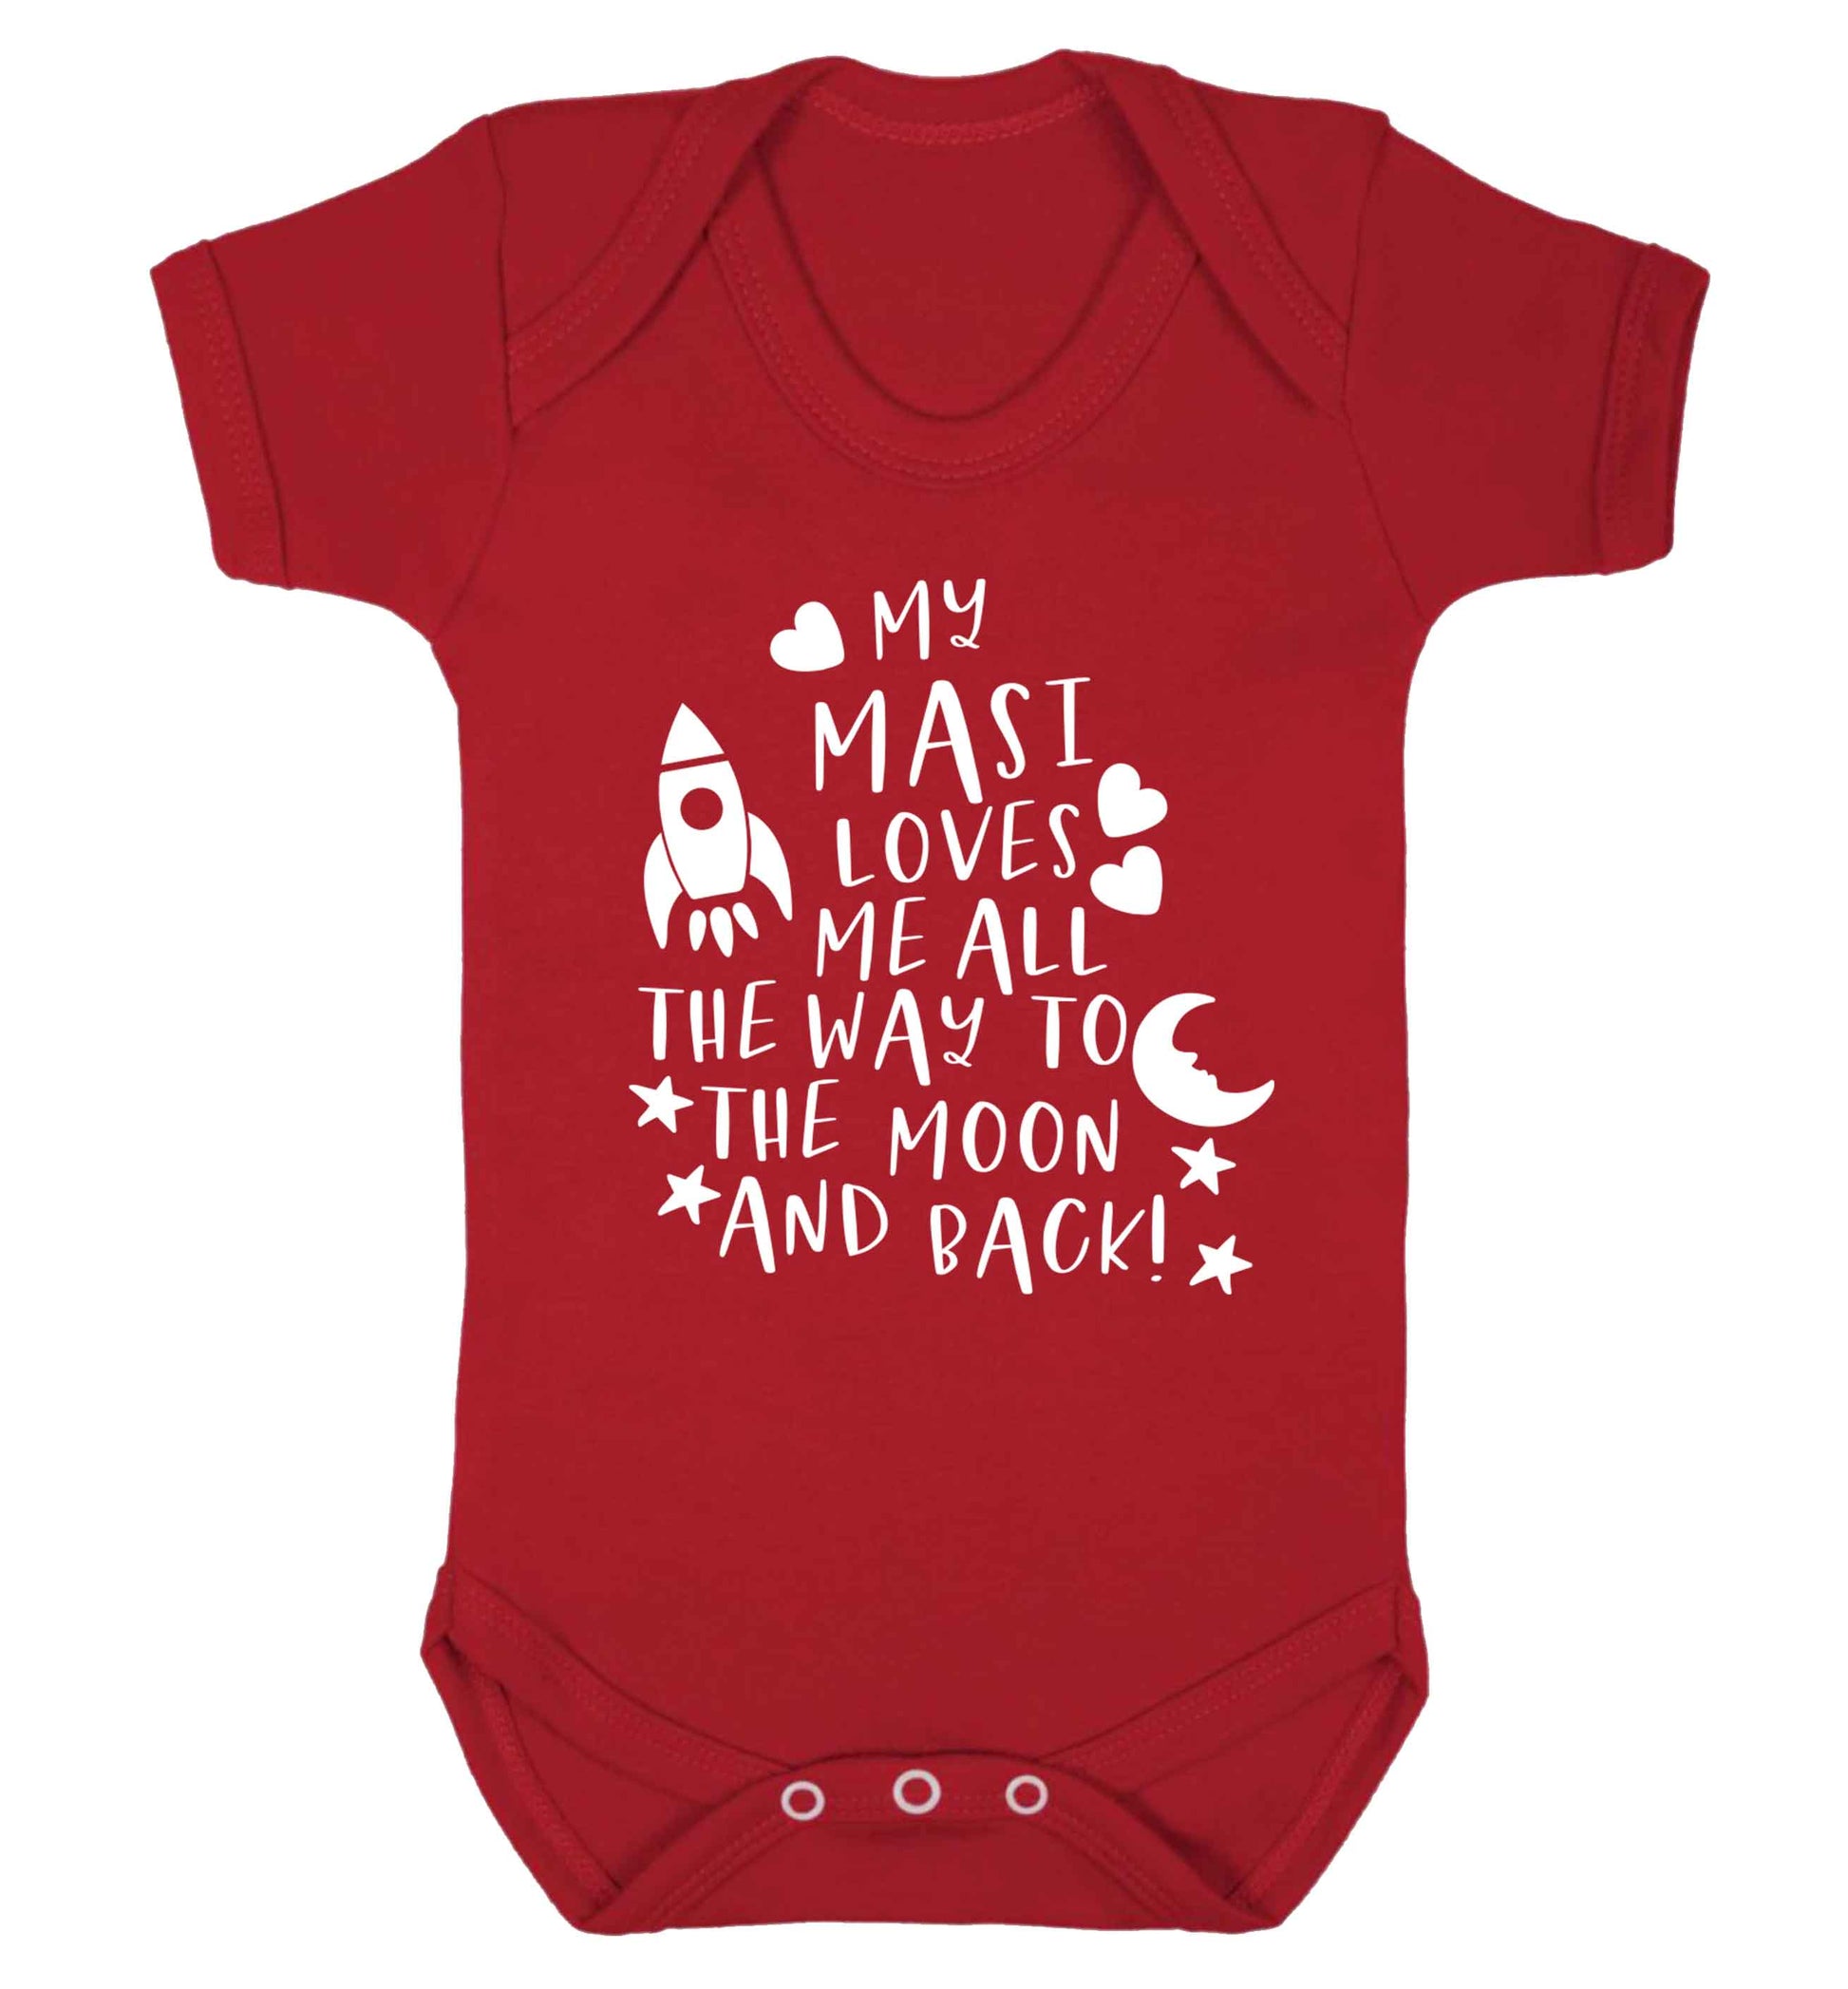 My masi loves me all the way to the moon and back Baby Vest red 18-24 months